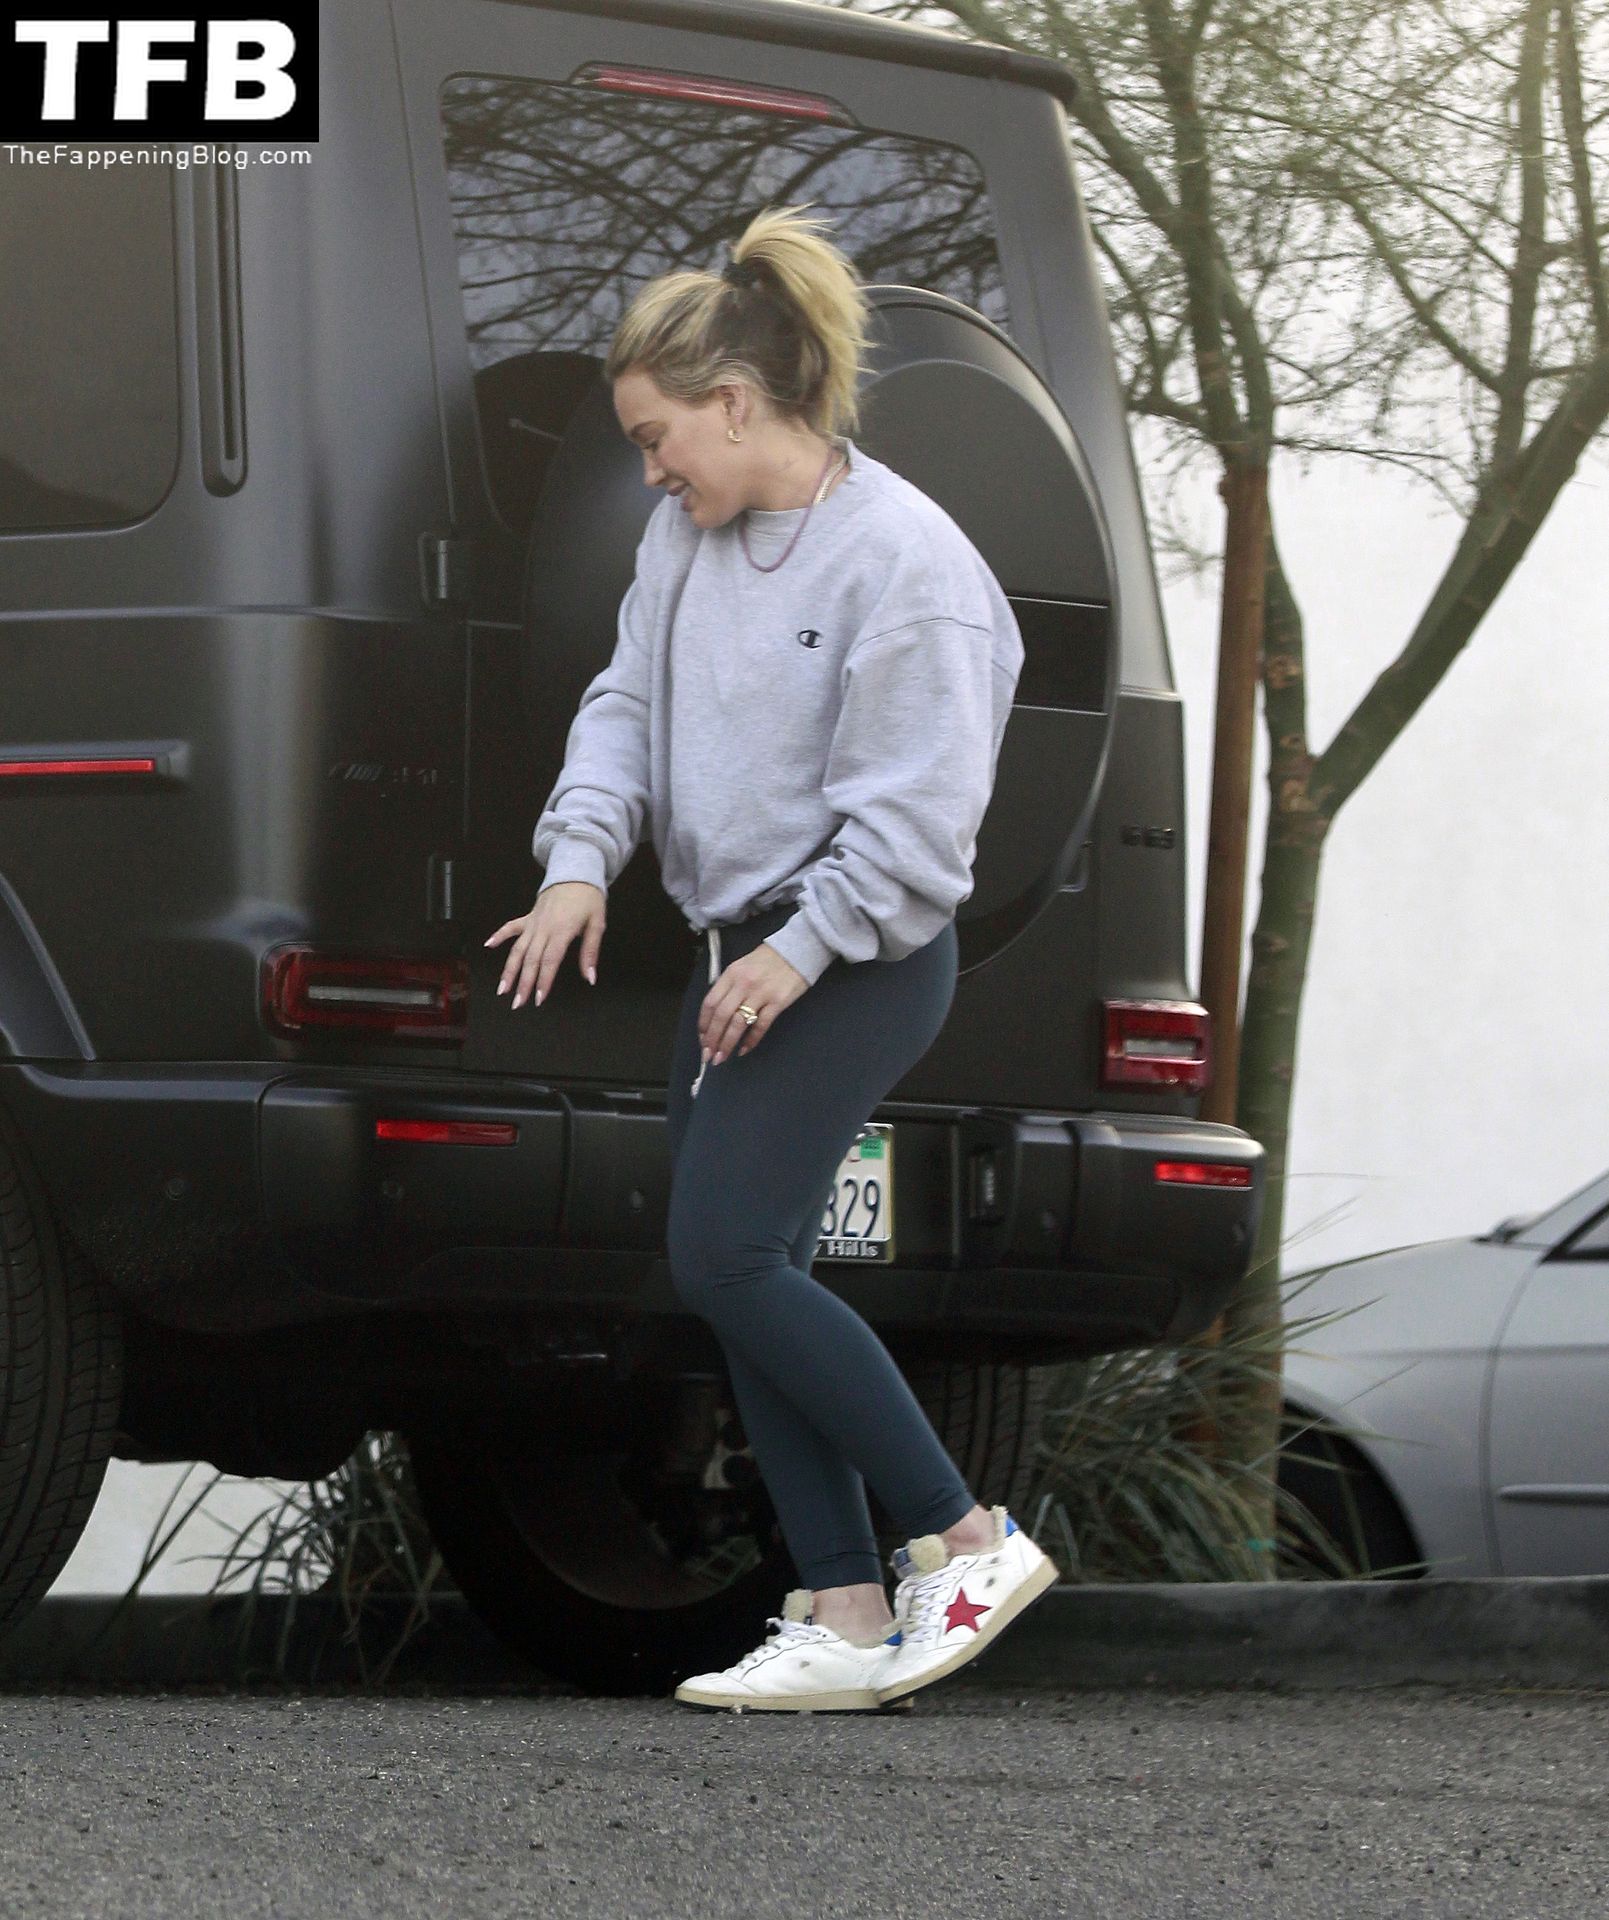 Hilary-Duff-shows-off-impressive-gym-results-in-a-pair-of-skintight-leggings-during-LA-errand-run...-one-day-after-hosting-quaint-Thanksgiving-gathering-at-her-home-The-Fappening-Blog-9.jpg